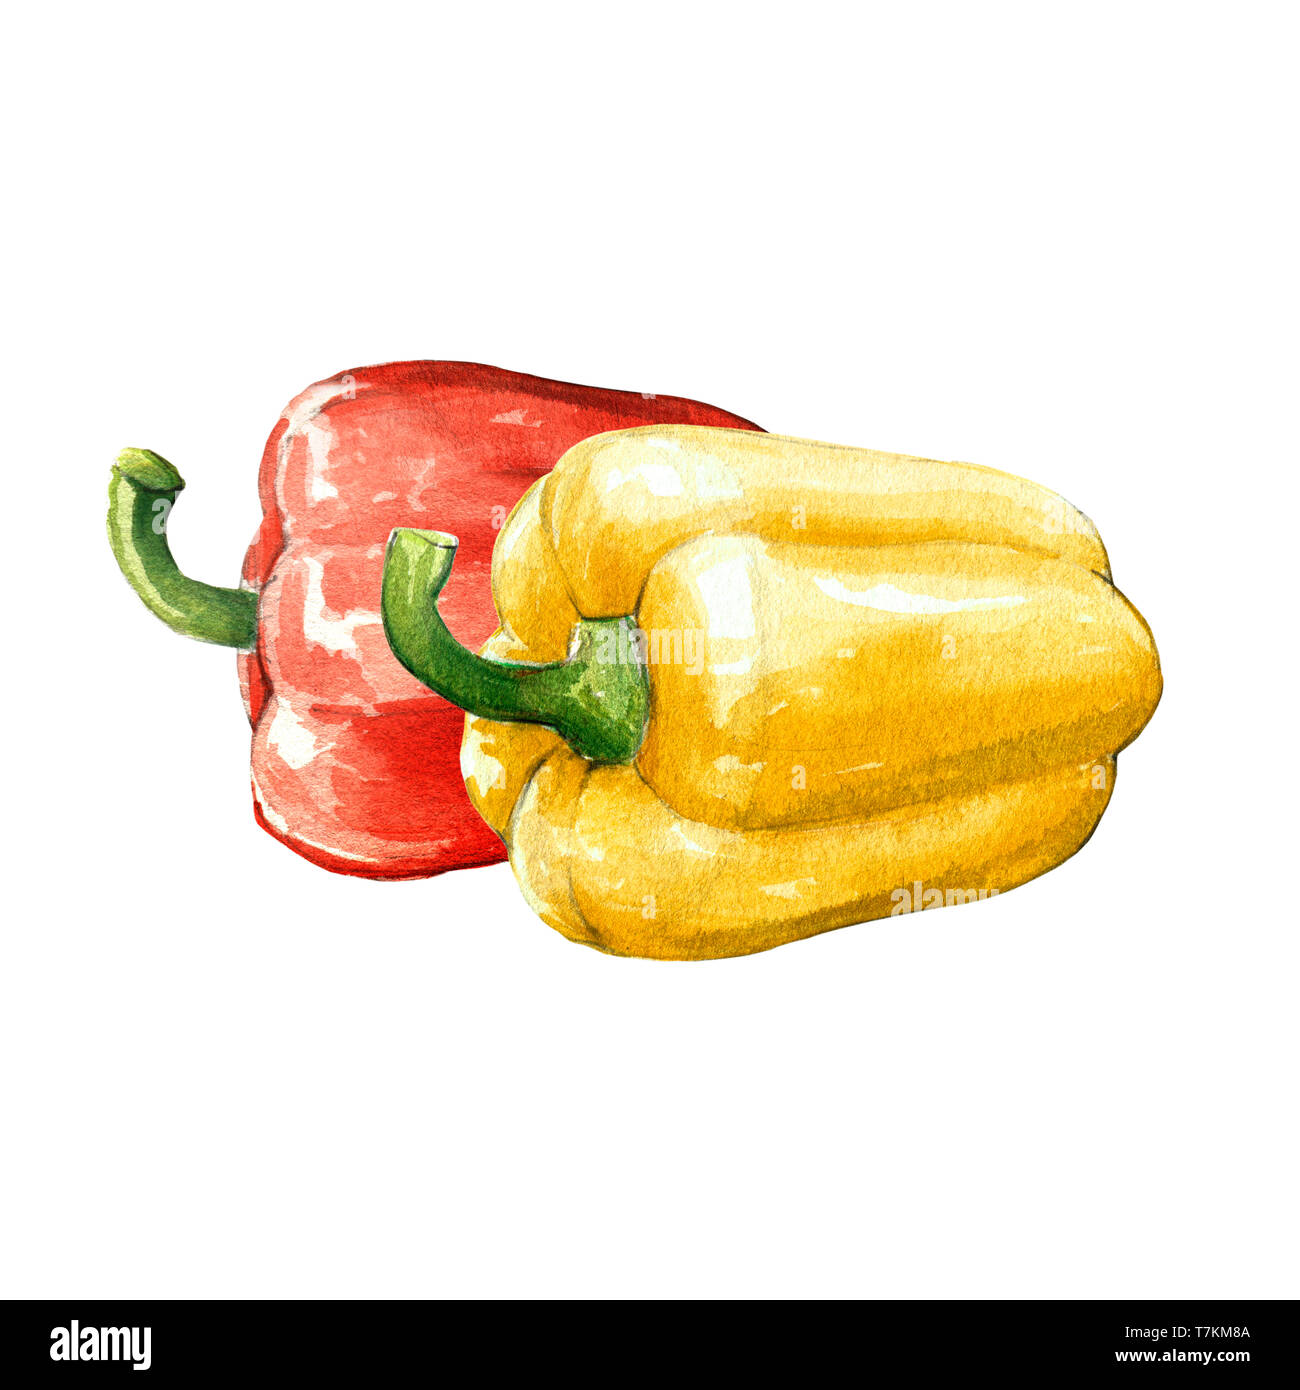 red yellow bell sweet pepper watercolor illustration on white background Stock Photo